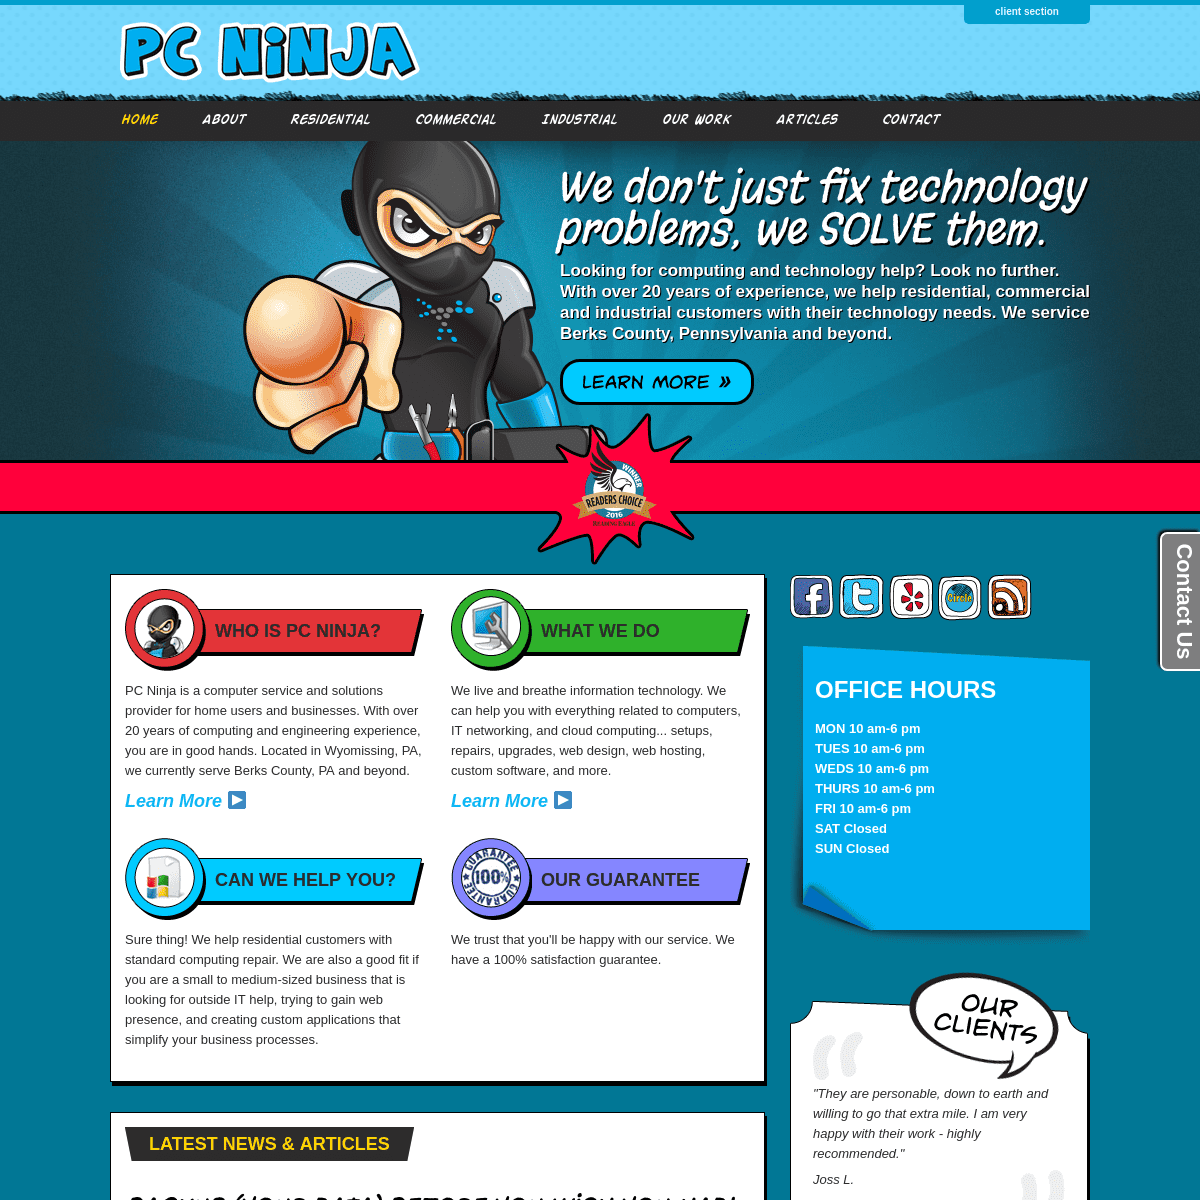 PC Ninja - Computer services & solutions serving Berks County, PA and beyond